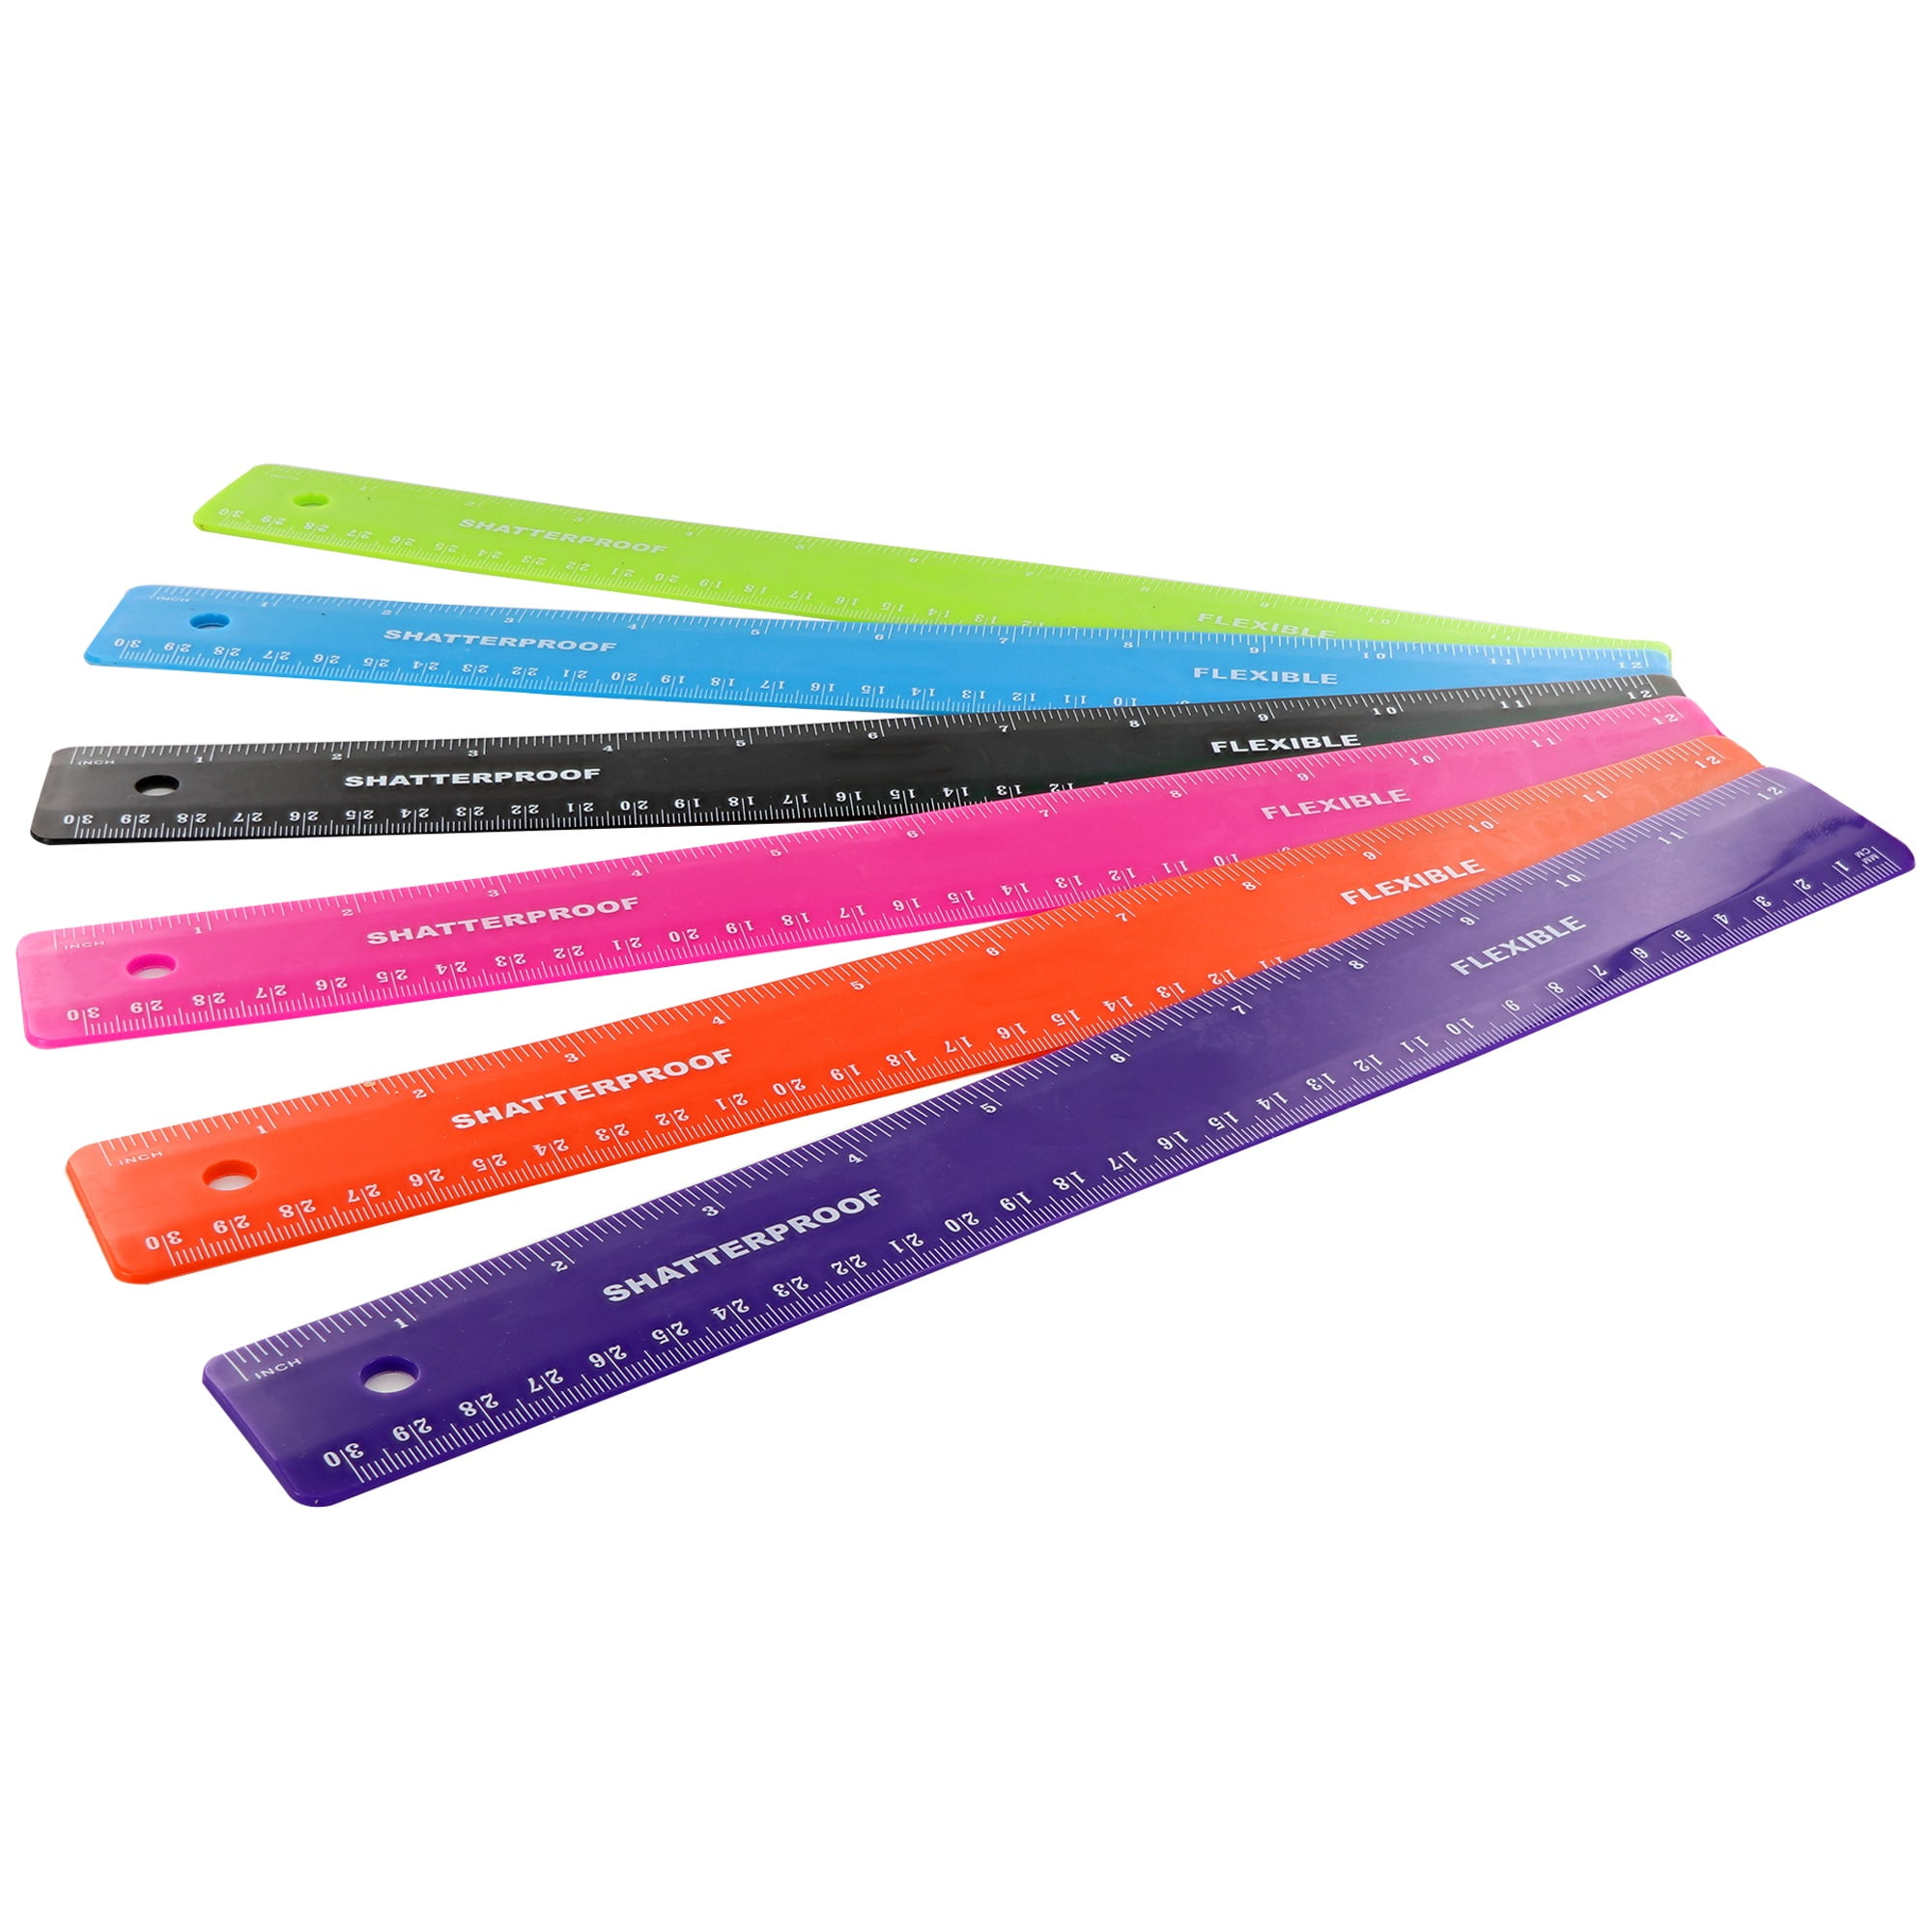 Emraw 12 inches (30 cm) Shatterproof Flexible Rulers Designed in Black,  Blue, Green, Pink, Purple, and Orange - Great for School, Home, Office â€“  (6 Pack) 